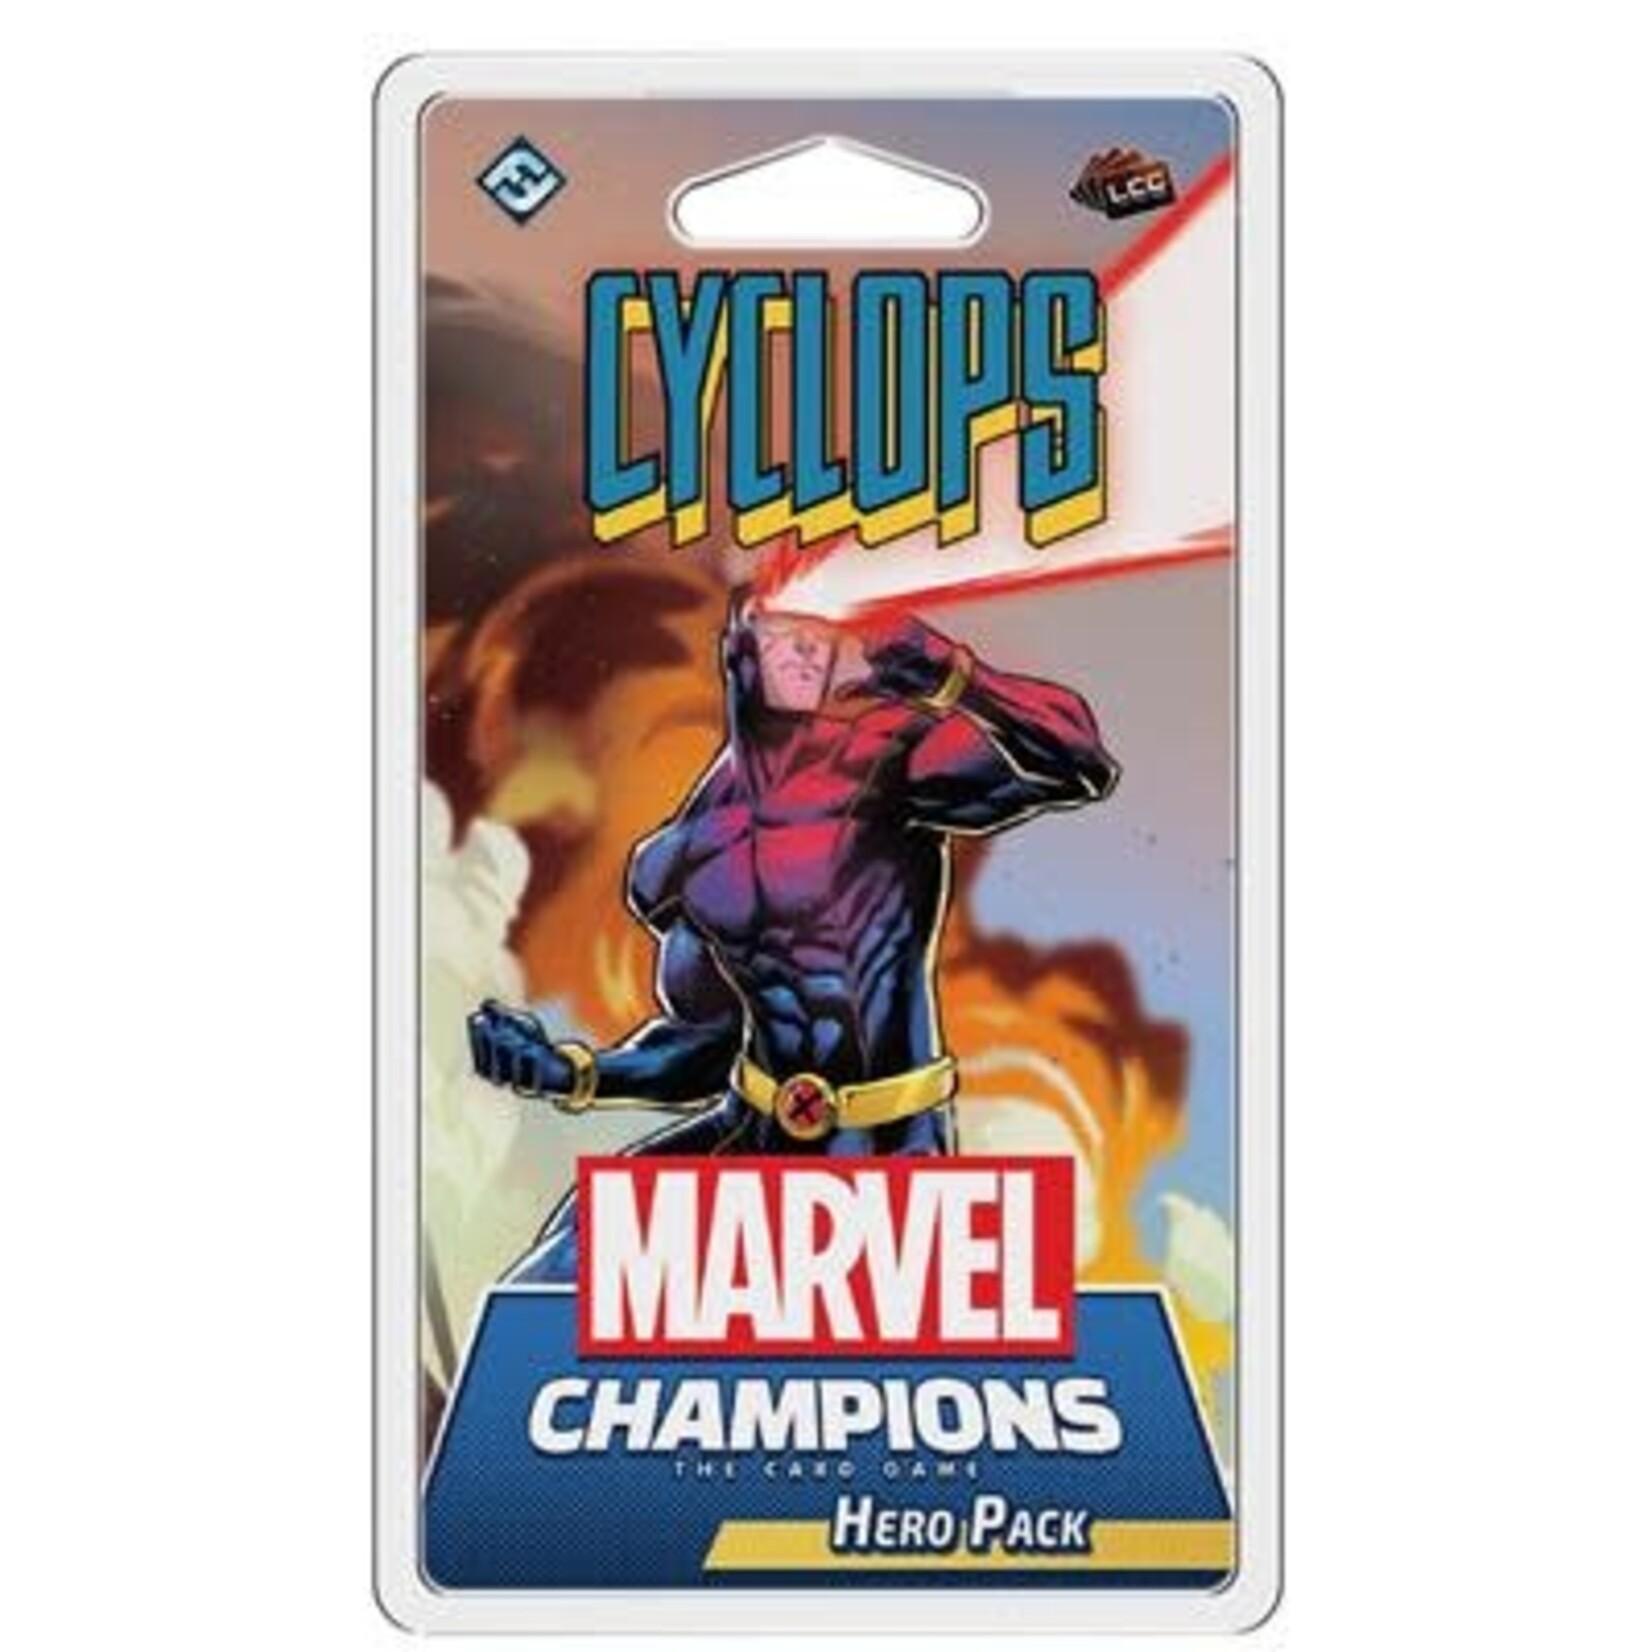 Fantasy Flight Games Marvel Champions The Card Game - Cyclops Hero Pac